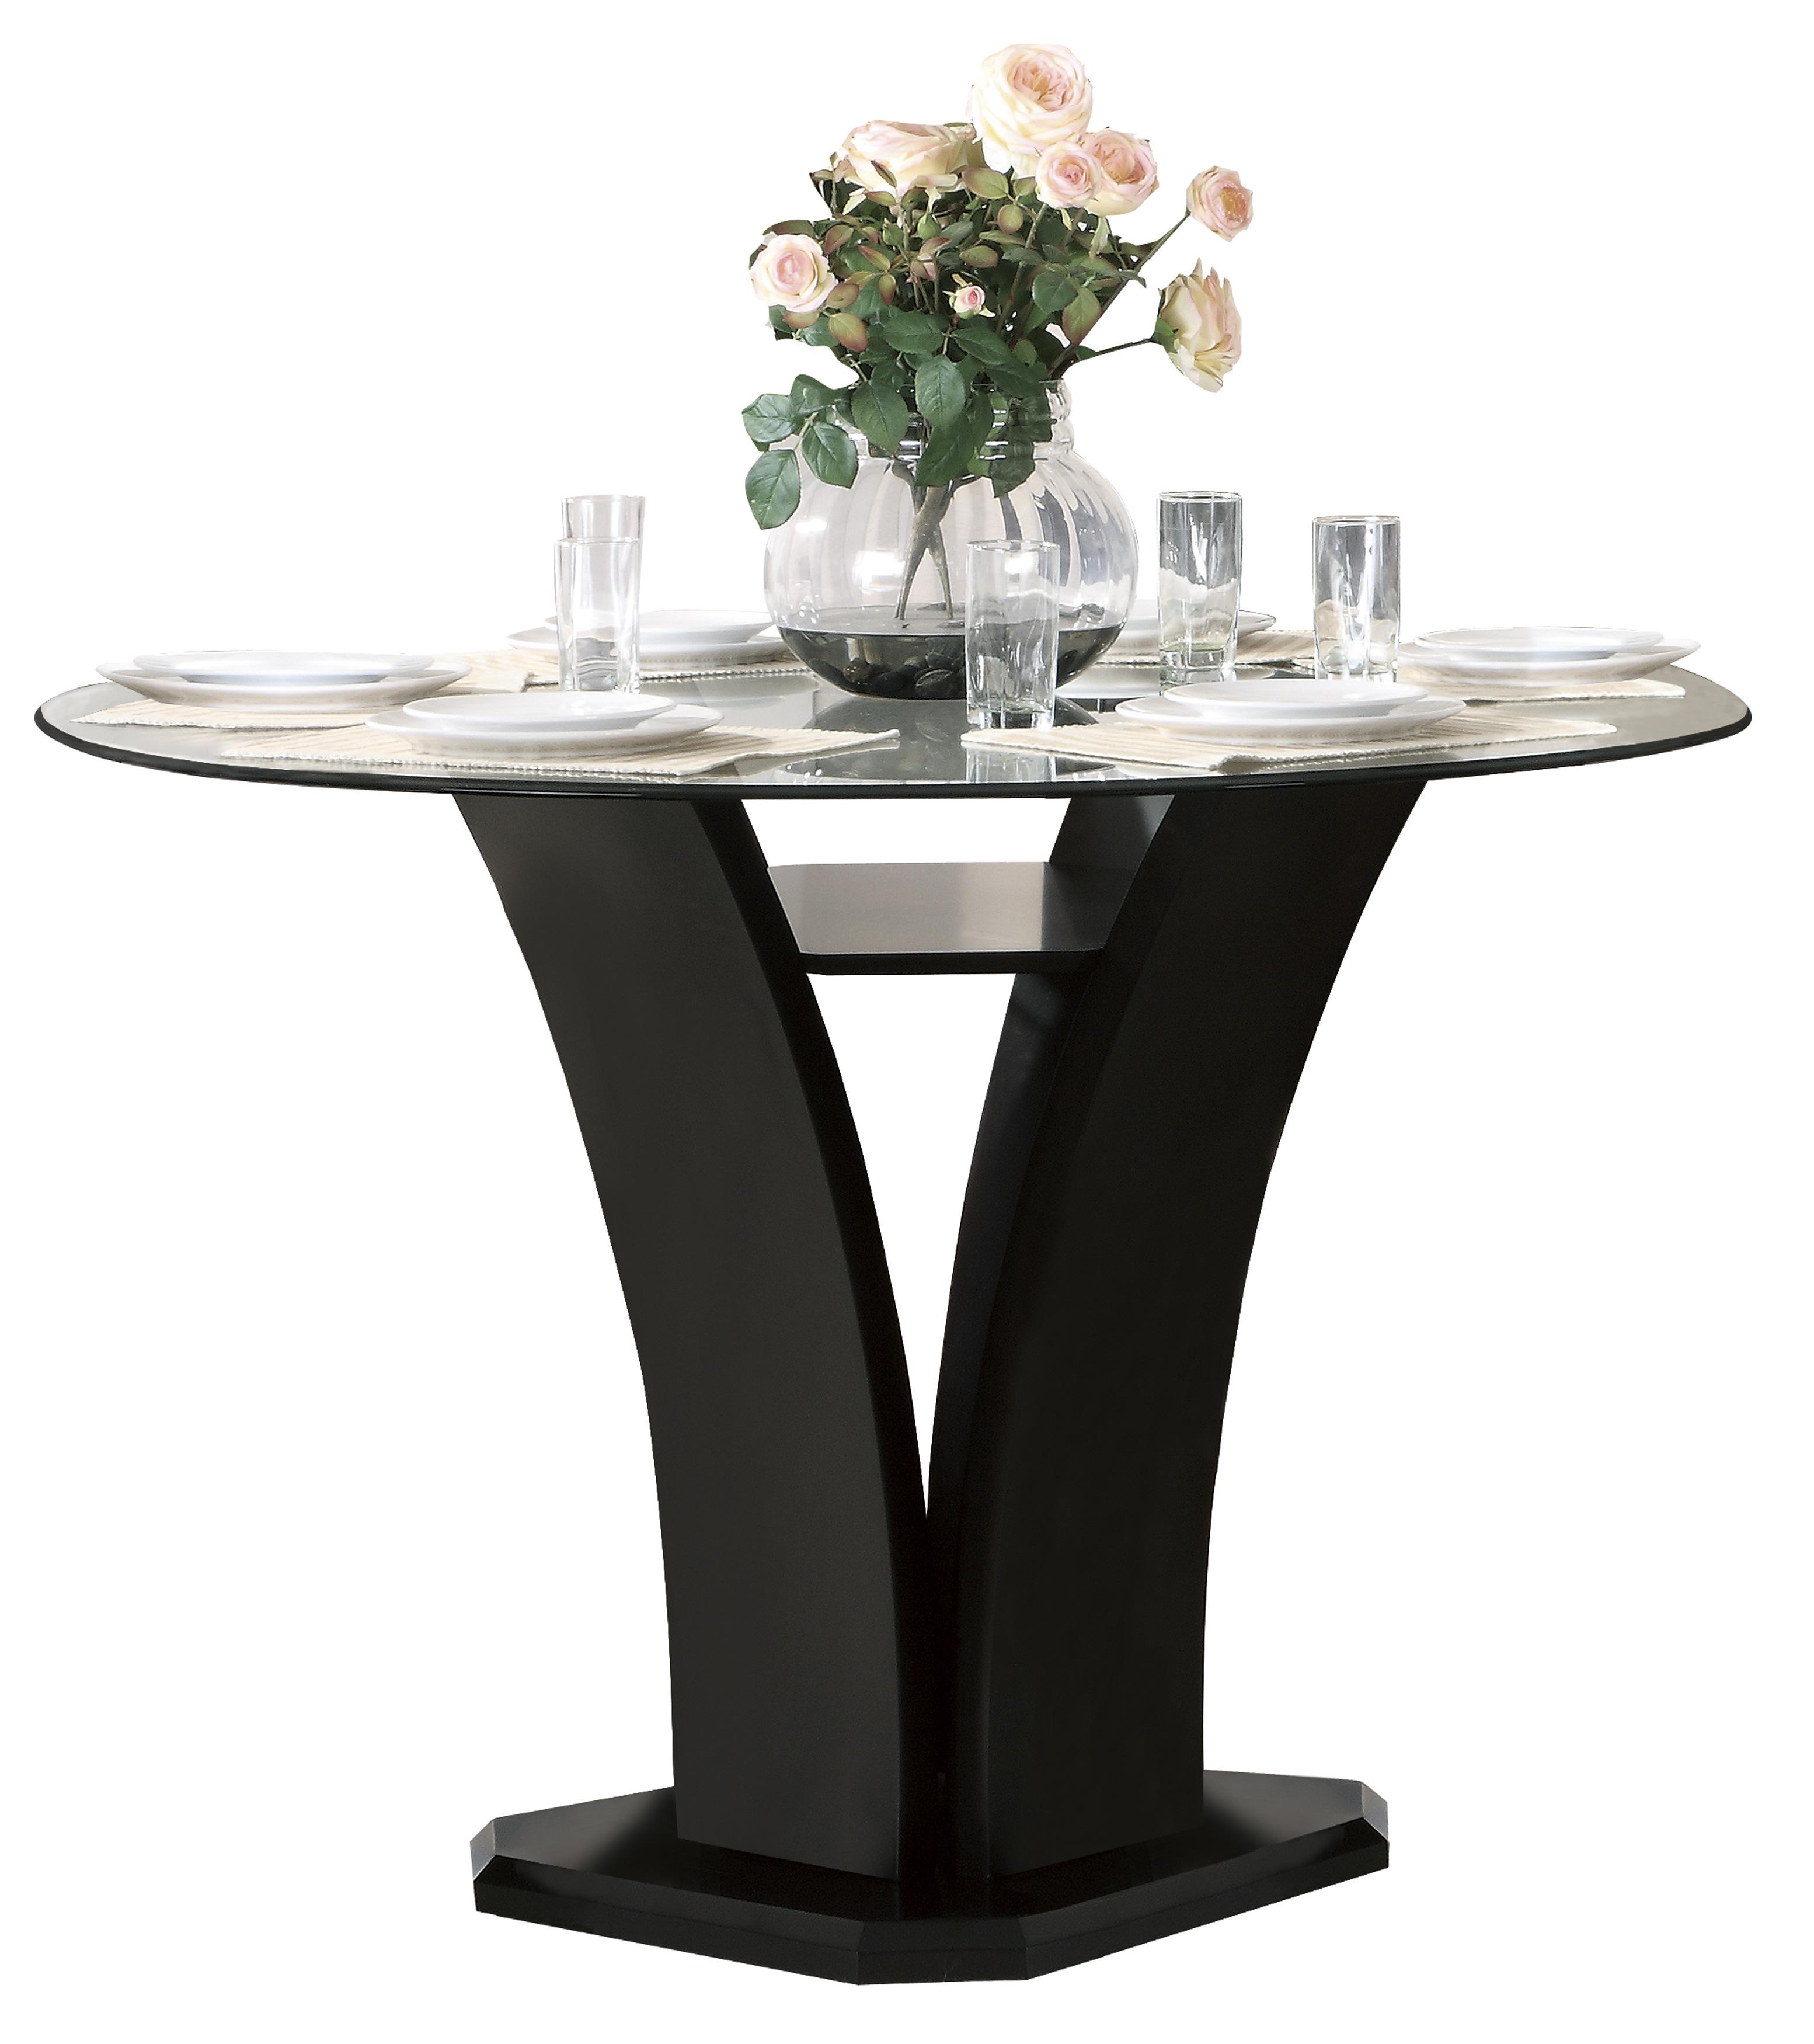 

    
Contemporary Espresso Tempered Glass Counter Height Table Homelegance 710-36RD* Daisy
